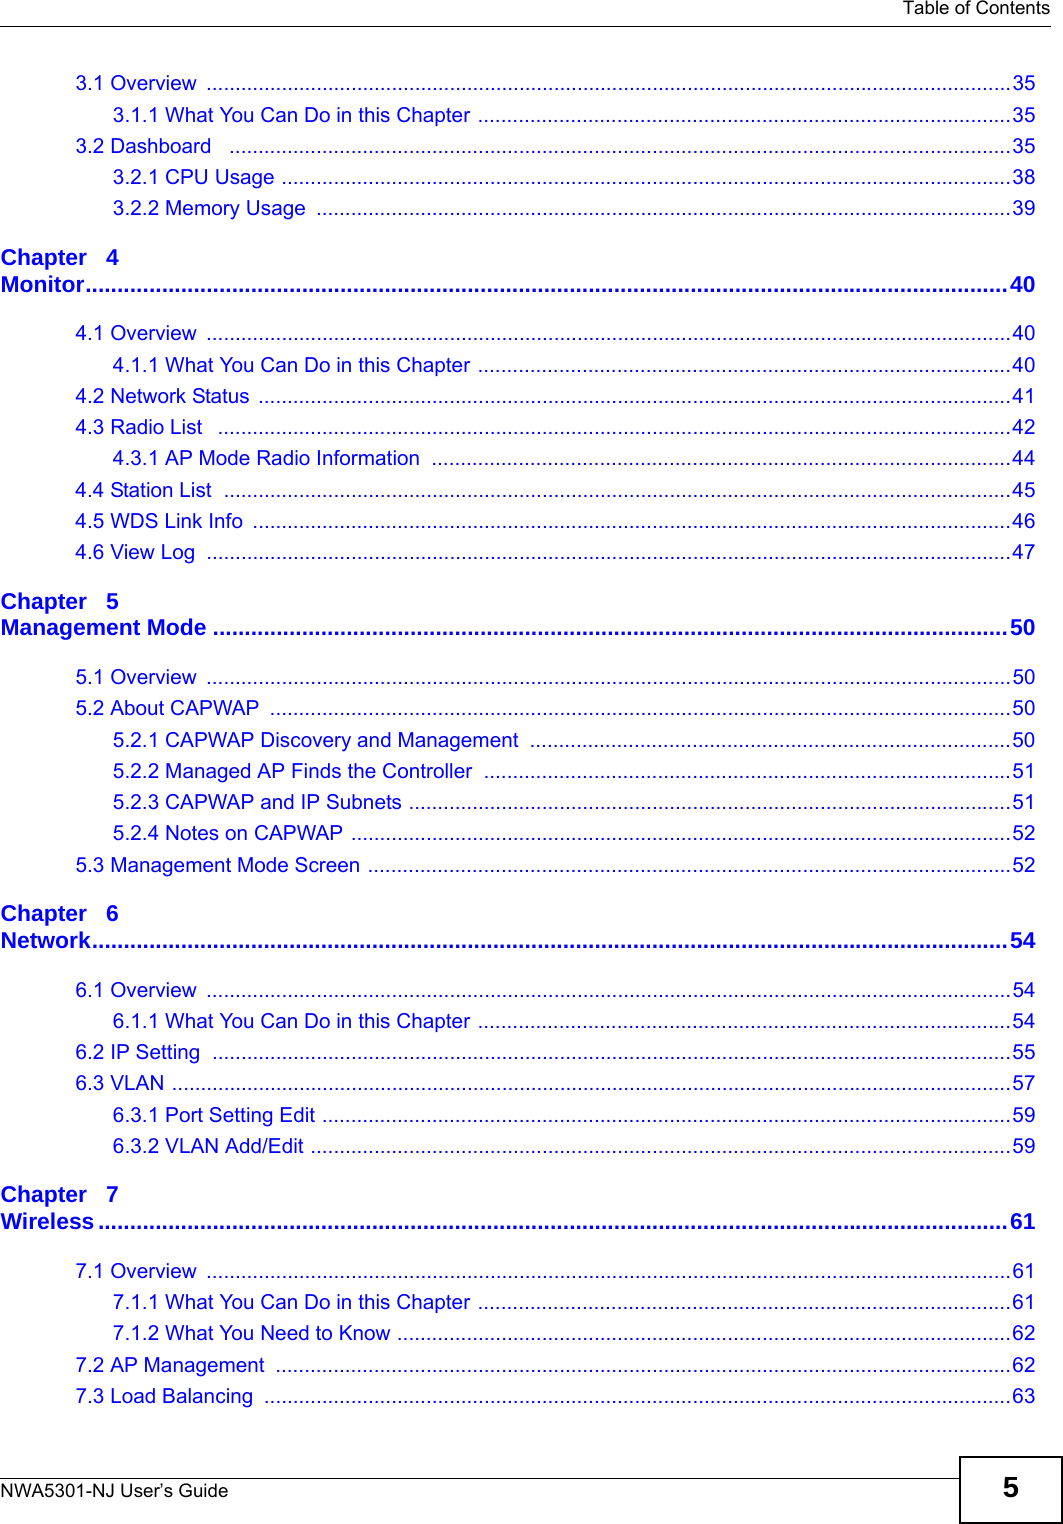   Table of ContentsNWA5301-NJ User’s Guide 53.1 Overview  ...........................................................................................................................................353.1.1 What You Can Do in this Chapter ............................................................................................353.2 Dashboard   .......................................................................................................................................353.2.1 CPU Usage ..............................................................................................................................383.2.2 Memory Usage  ........................................................................................................................39Chapter   4Monitor.................................................................................................................................................404.1 Overview  ...........................................................................................................................................404.1.1 What You Can Do in this Chapter ............................................................................................404.2 Network Status ..................................................................................................................................414.3 Radio List   .........................................................................................................................................424.3.1 AP Mode Radio Information  ....................................................................................................444.4 Station List  ........................................................................................................................................454.5 WDS Link Info  ...................................................................................................................................464.6 View Log  ...........................................................................................................................................47Chapter   5Management Mode .............................................................................................................................505.1 Overview  ...........................................................................................................................................505.2 About CAPWAP  ................................................................................................................................505.2.1 CAPWAP Discovery and Management  ...................................................................................505.2.2 Managed AP Finds the Controller  ...........................................................................................515.2.3 CAPWAP and IP Subnets ........................................................................................................515.2.4 Notes on CAPWAP ..................................................................................................................525.3 Management Mode Screen ...............................................................................................................52Chapter   6Network................................................................................................................................................546.1 Overview  ...........................................................................................................................................546.1.1 What You Can Do in this Chapter ............................................................................................546.2 IP Setting  ..........................................................................................................................................556.3 VLAN .................................................................................................................................................576.3.1 Port Setting Edit .......................................................................................................................596.3.2 VLAN Add/Edit .........................................................................................................................59Chapter   7Wireless...............................................................................................................................................617.1 Overview  ...........................................................................................................................................617.1.1 What You Can Do in this Chapter ............................................................................................617.1.2 What You Need to Know ..........................................................................................................627.2 AP Management  ...............................................................................................................................627.3 Load Balancing  .................................................................................................................................63